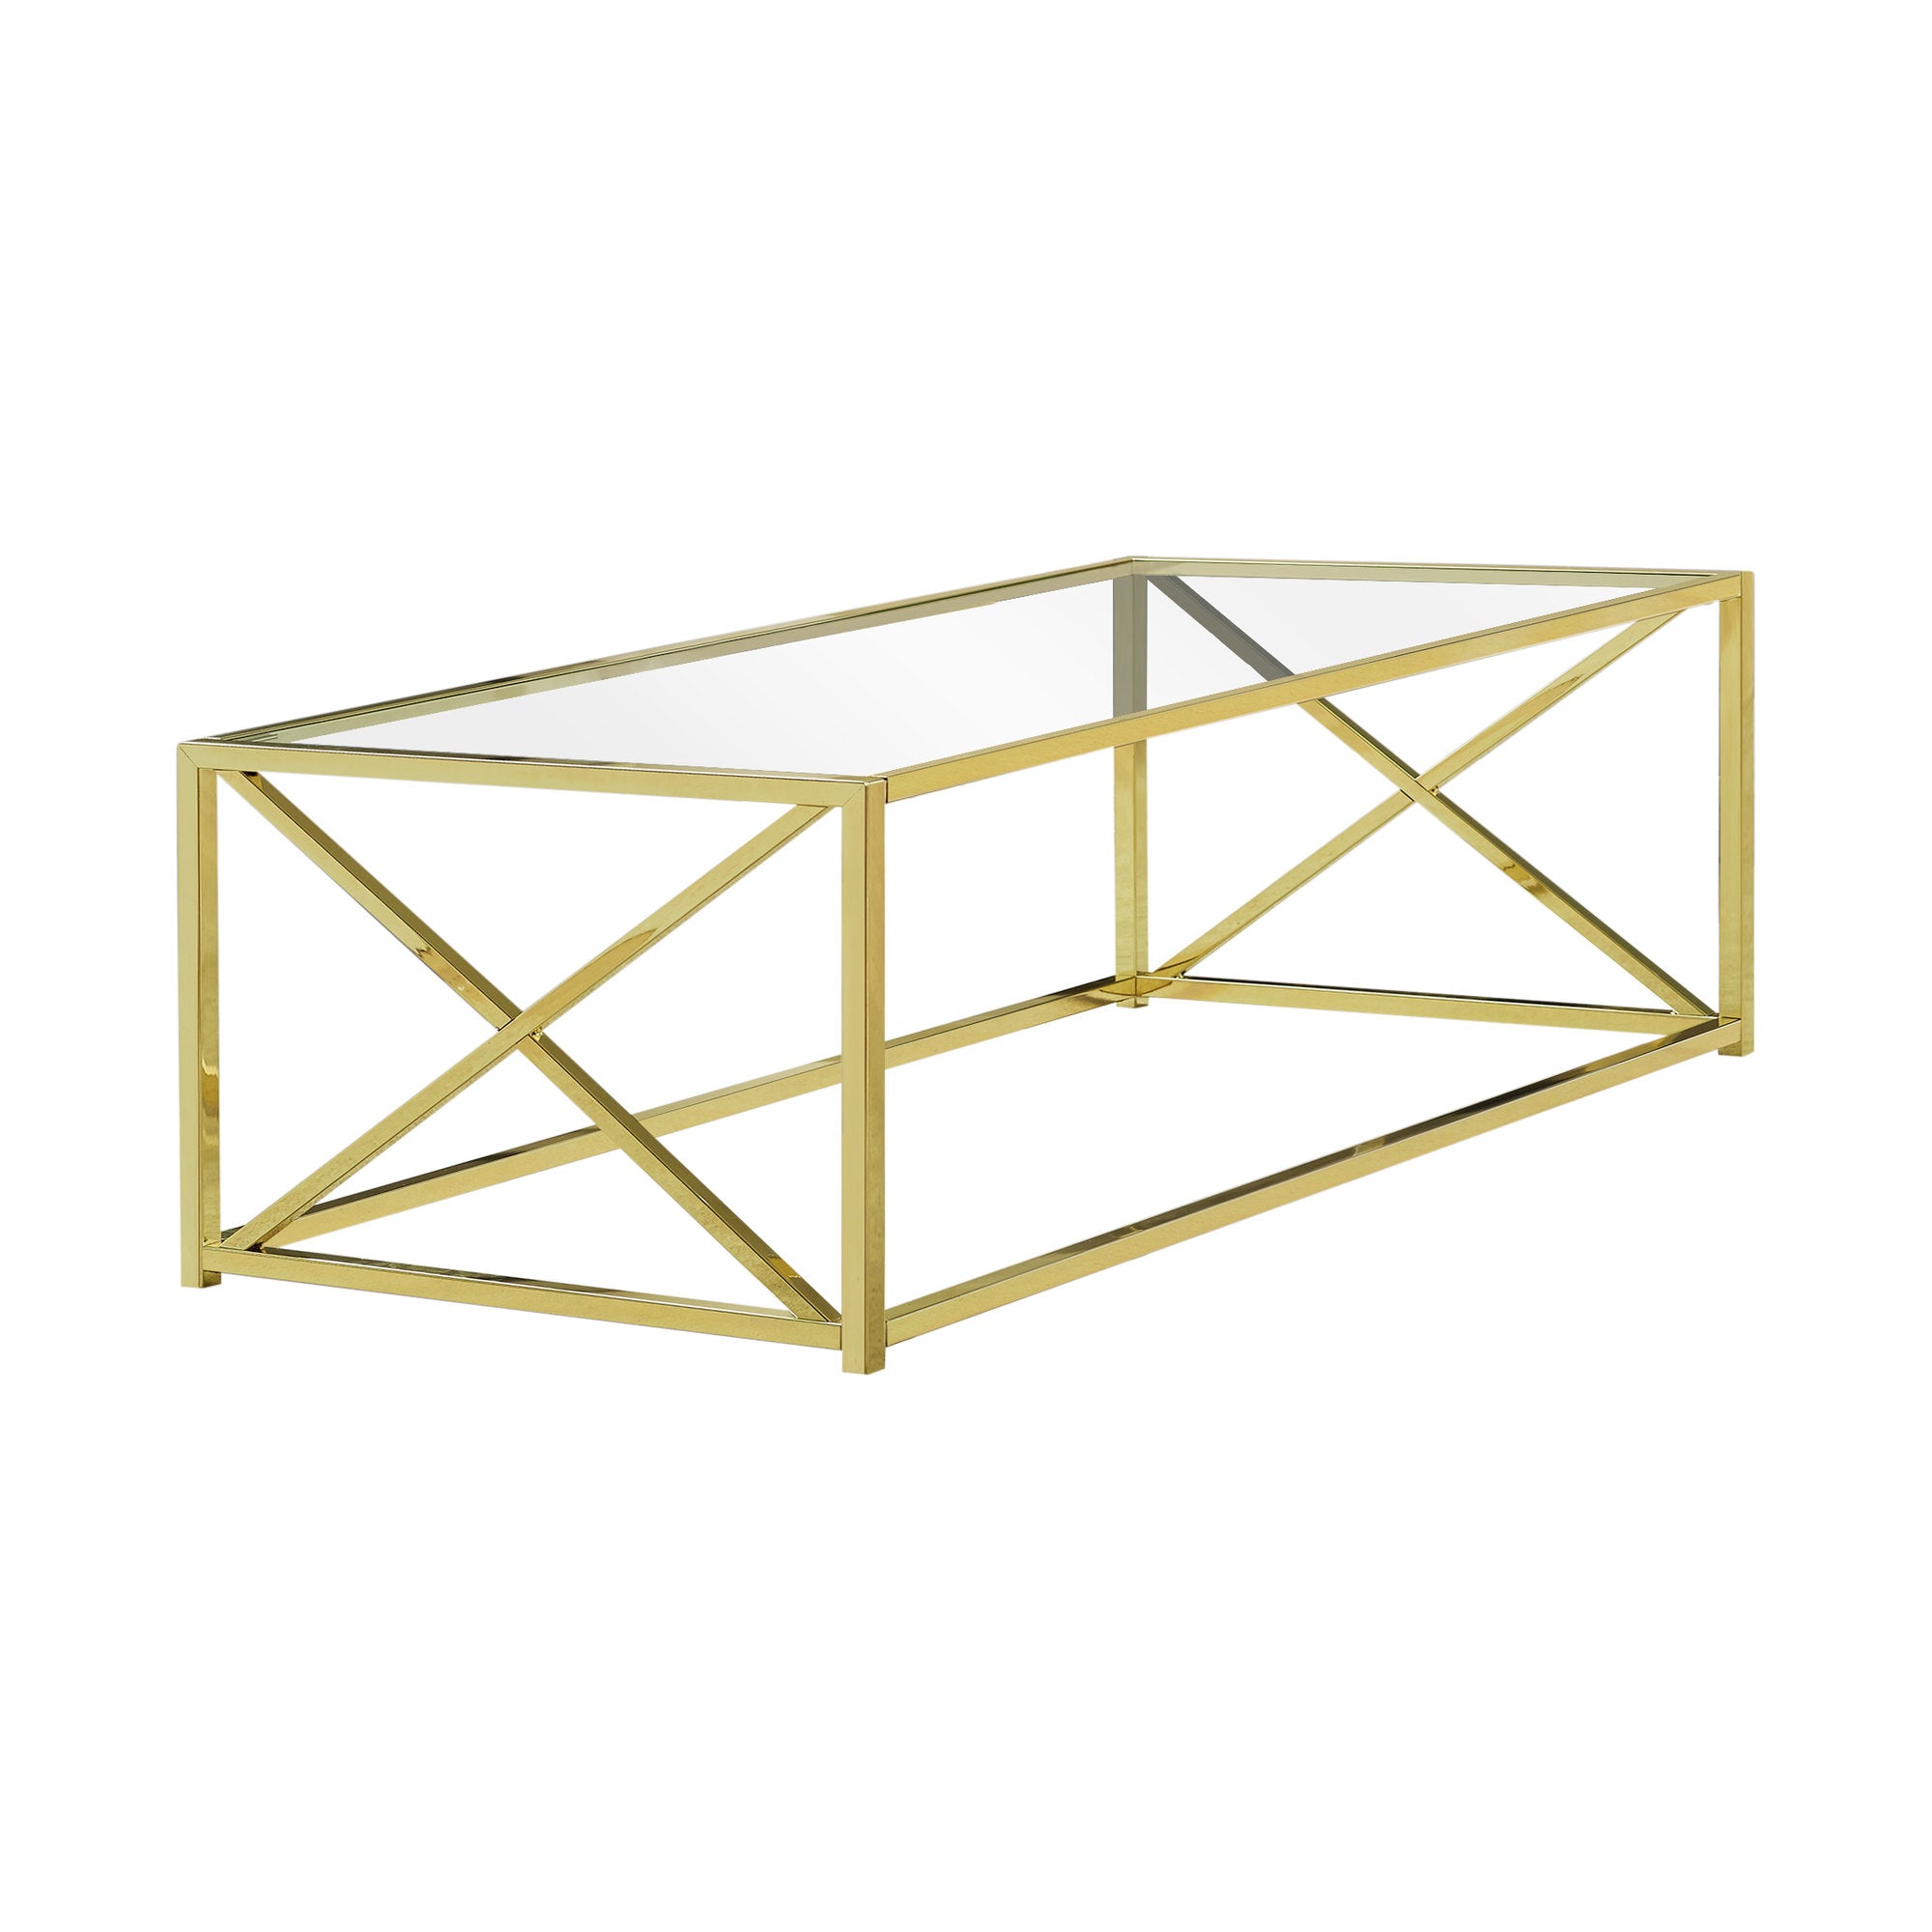 MN-653444    Coffee Table, Accent, Cocktail, Rectangular, Living Room, Metal Frame, Tempered Glass, Gold, Contemporary, Modern